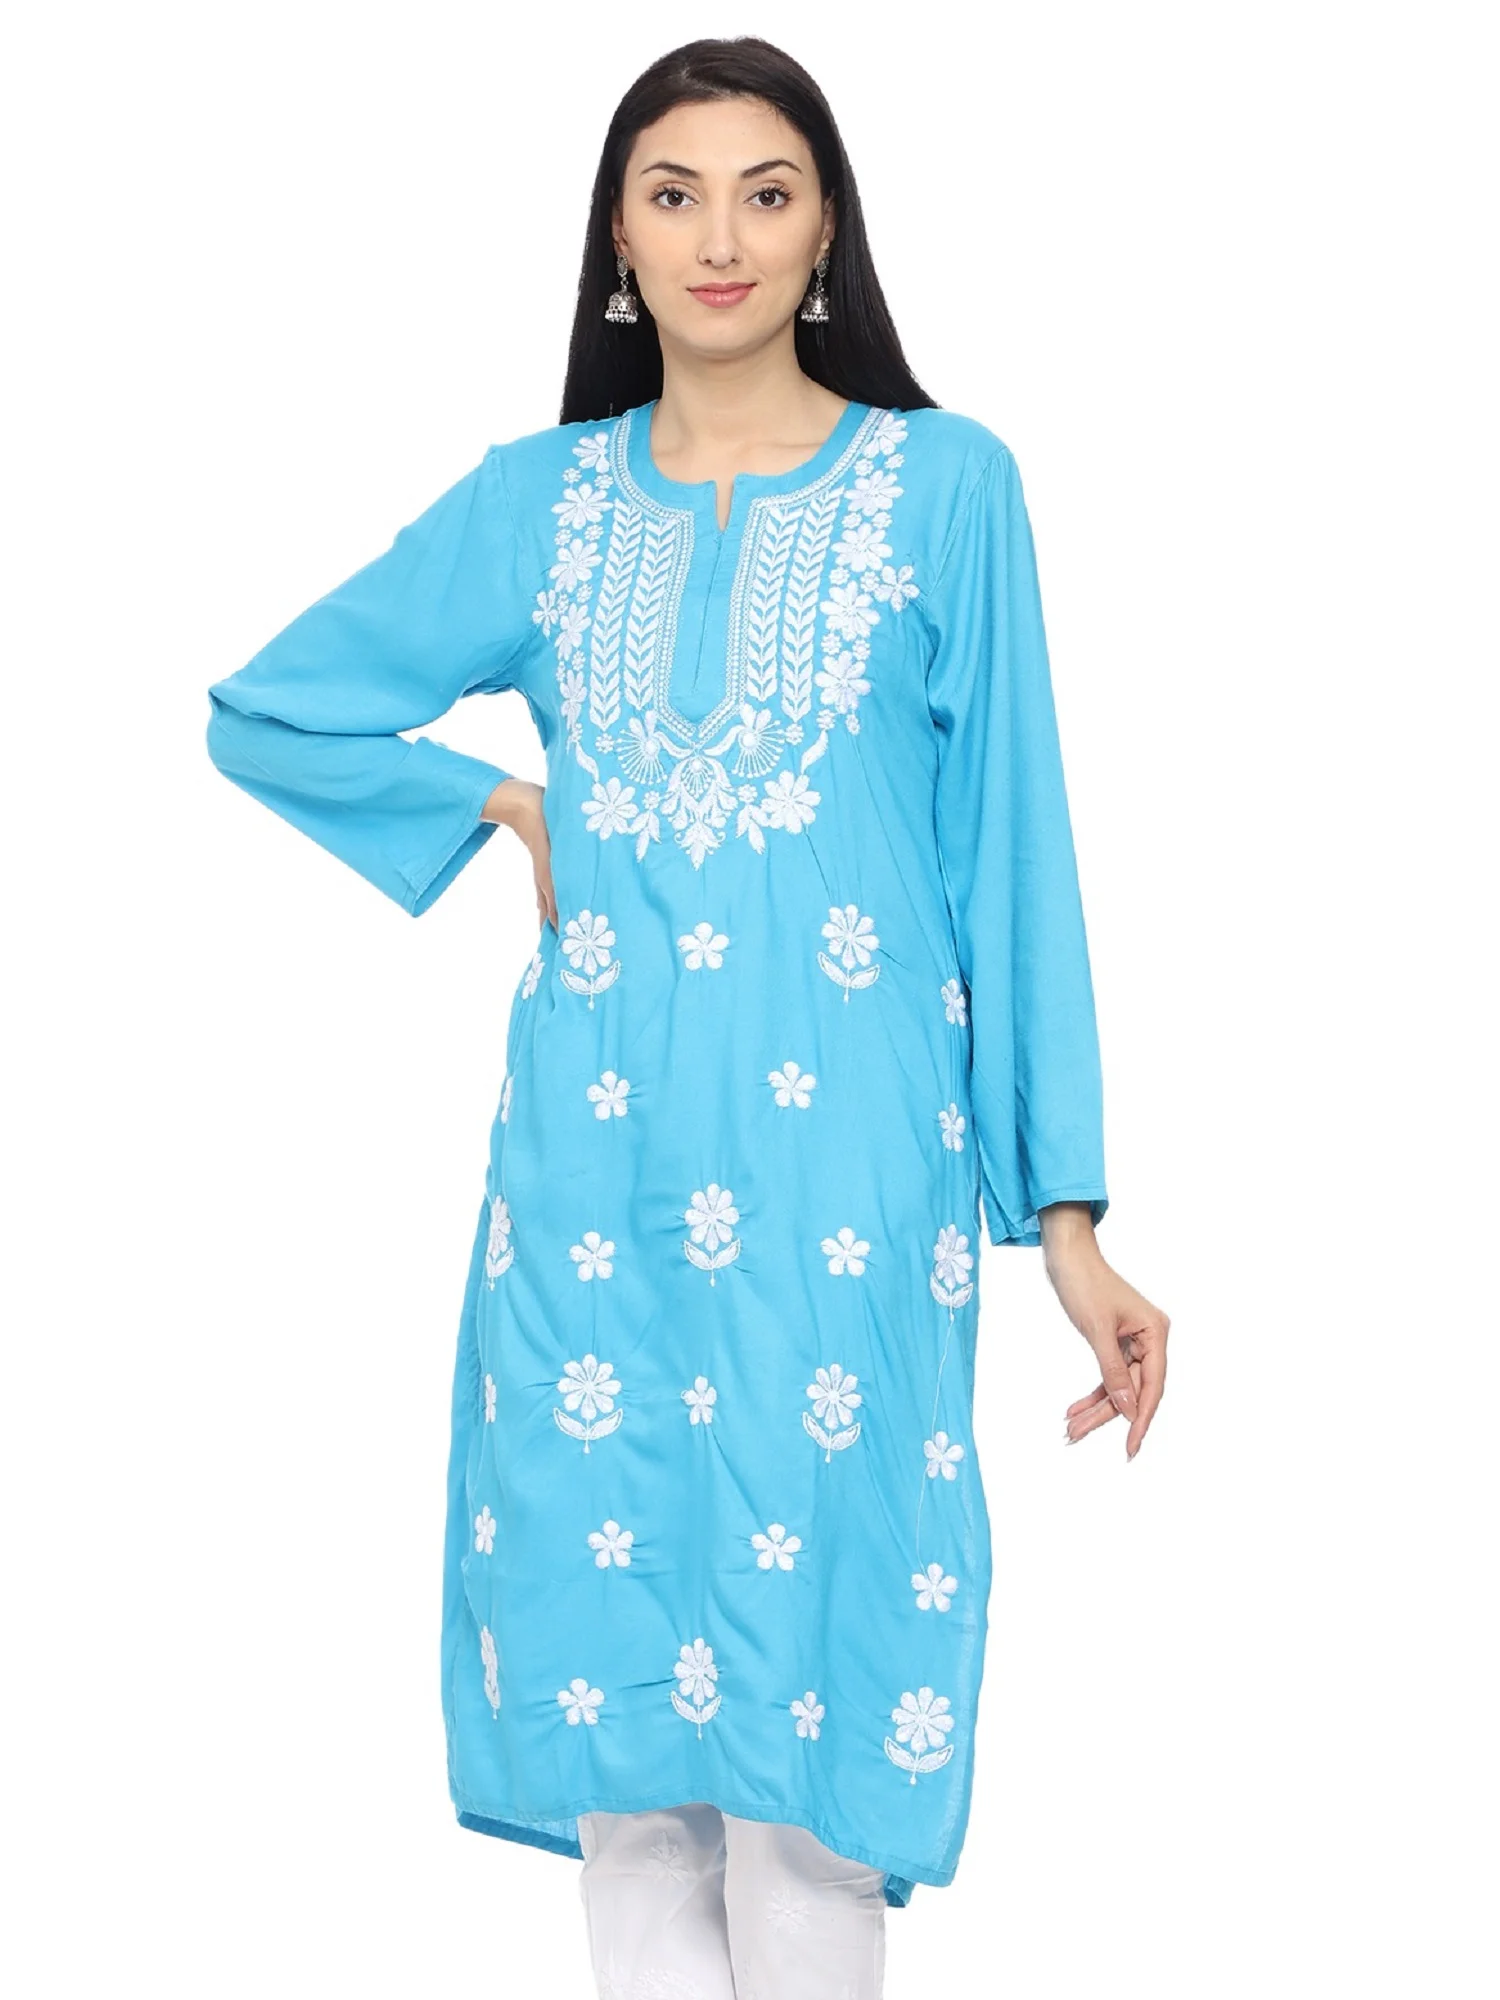 Lavangi Lucknow Sky Blue Chikankari Rayon Kurti The website is temporarily unable to service your request as it exceeded resource limit. Please try again later.